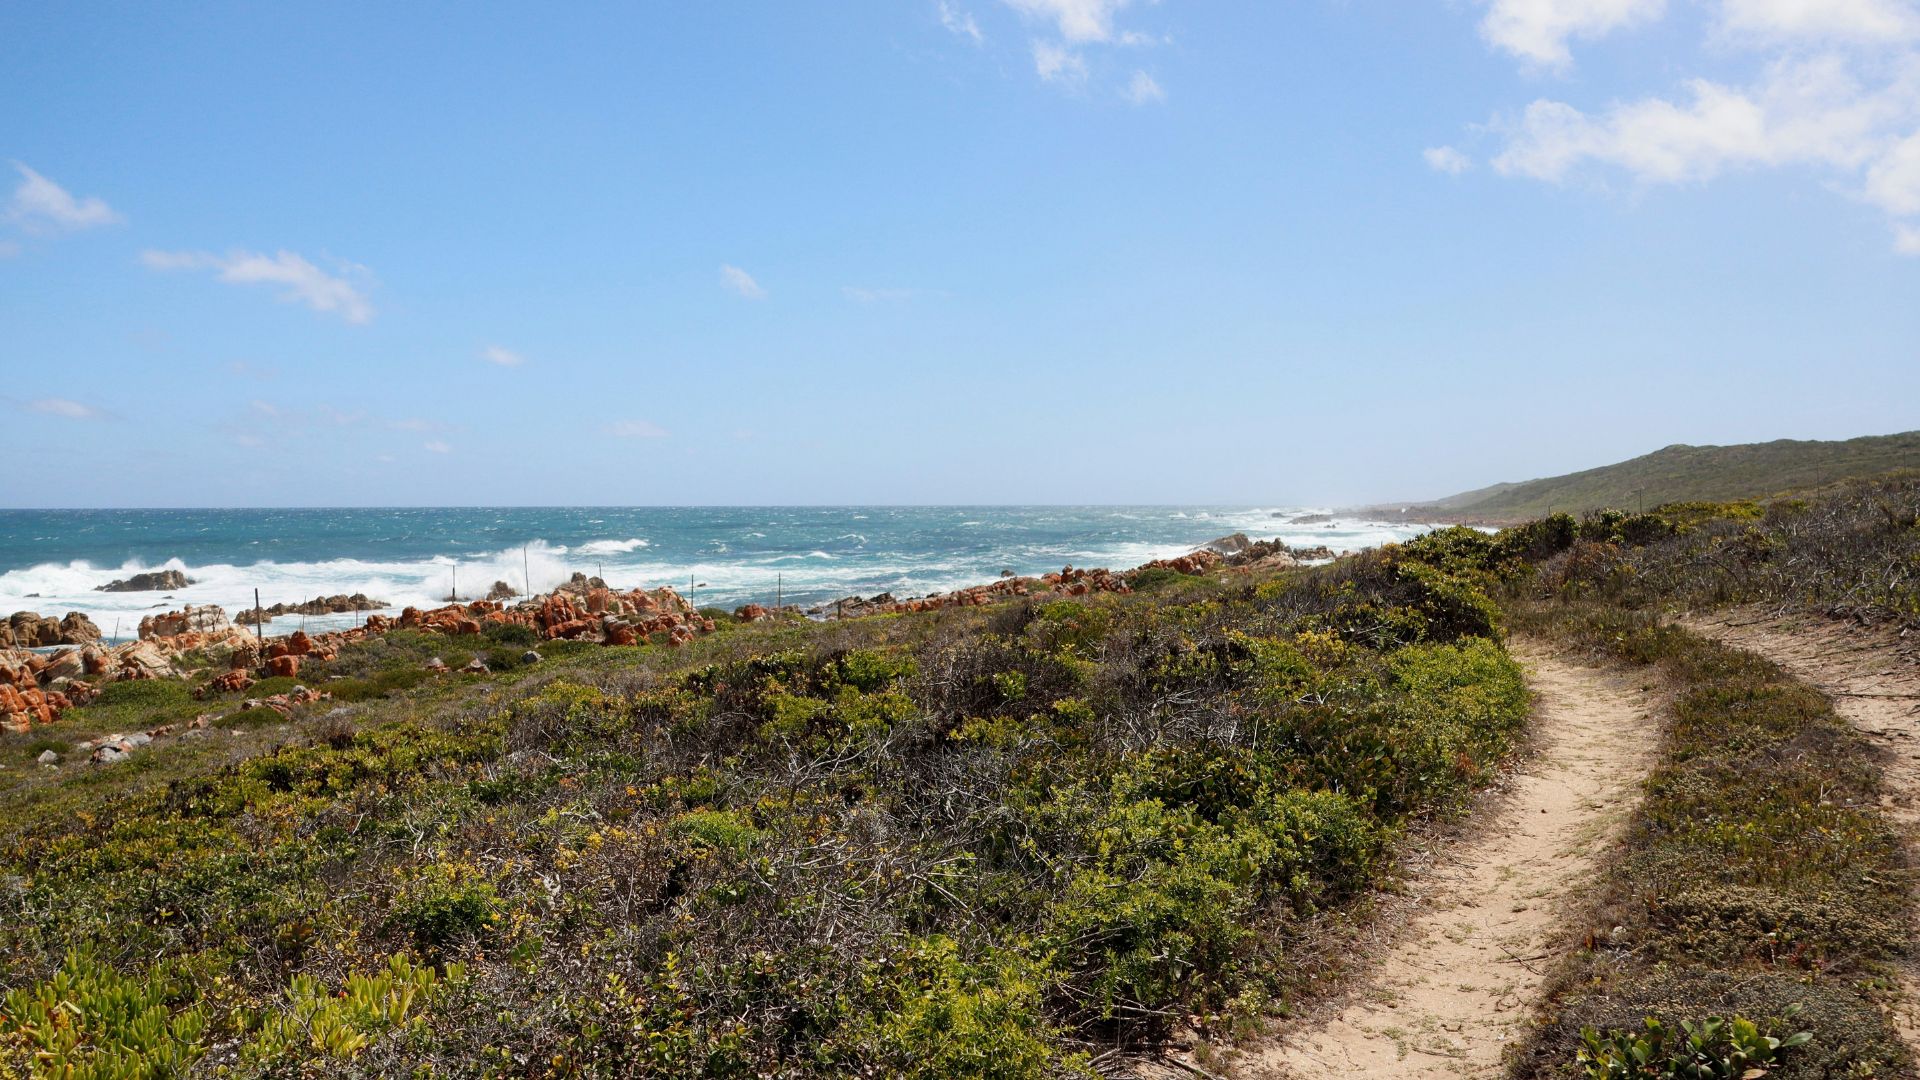 Walking path along the coast. Lots of golden, brown, and dark green plants covering the ground around the path